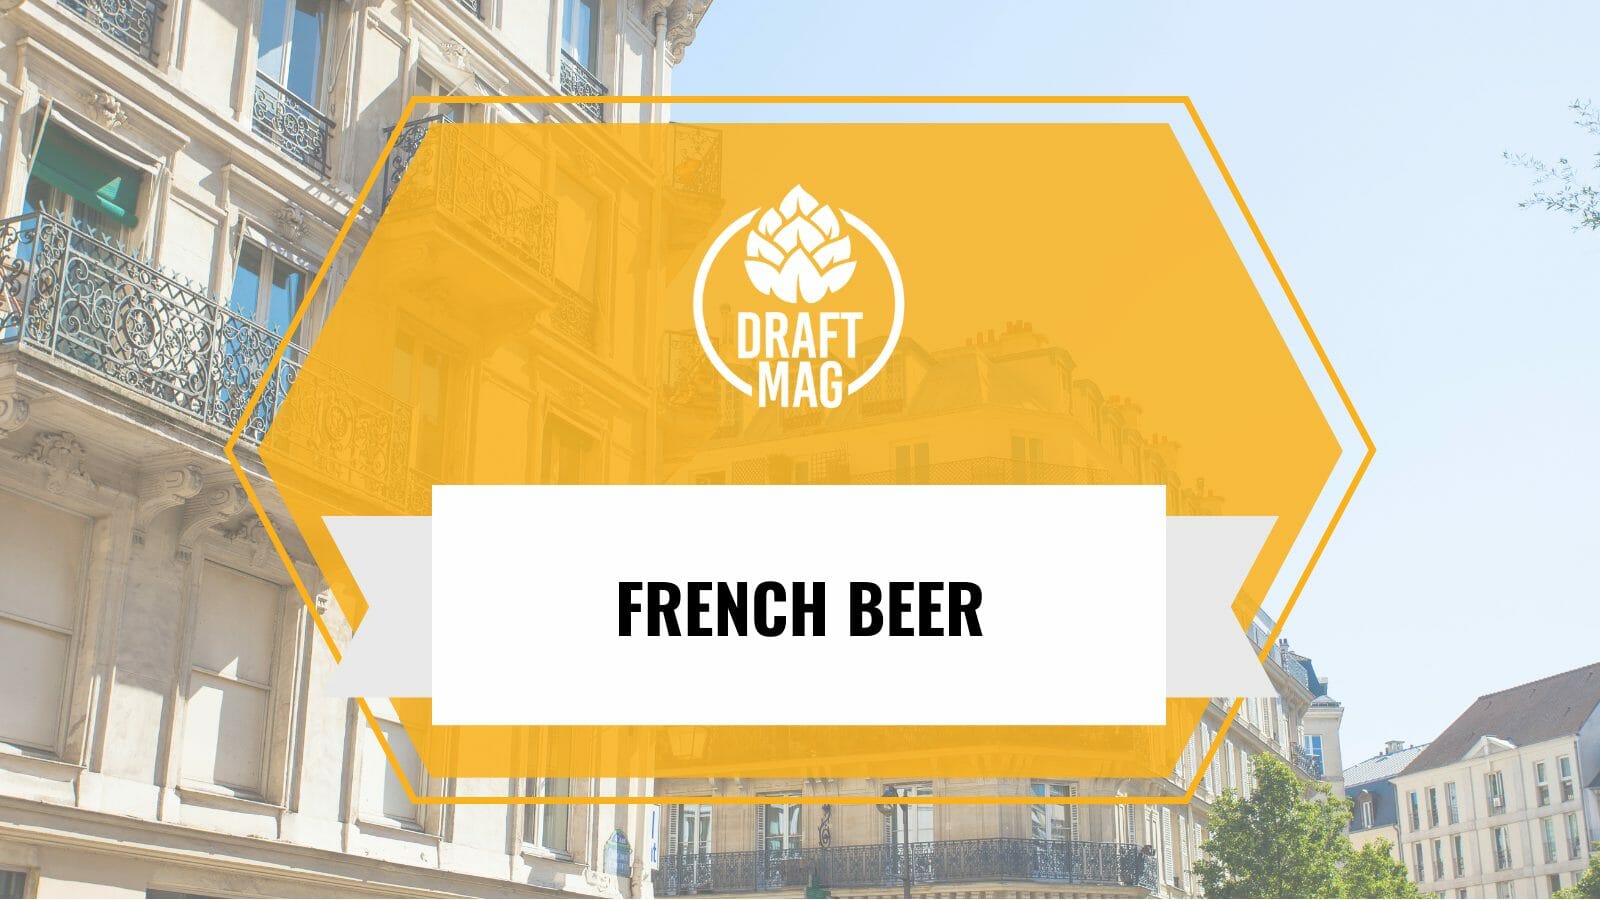 Best selling french beers